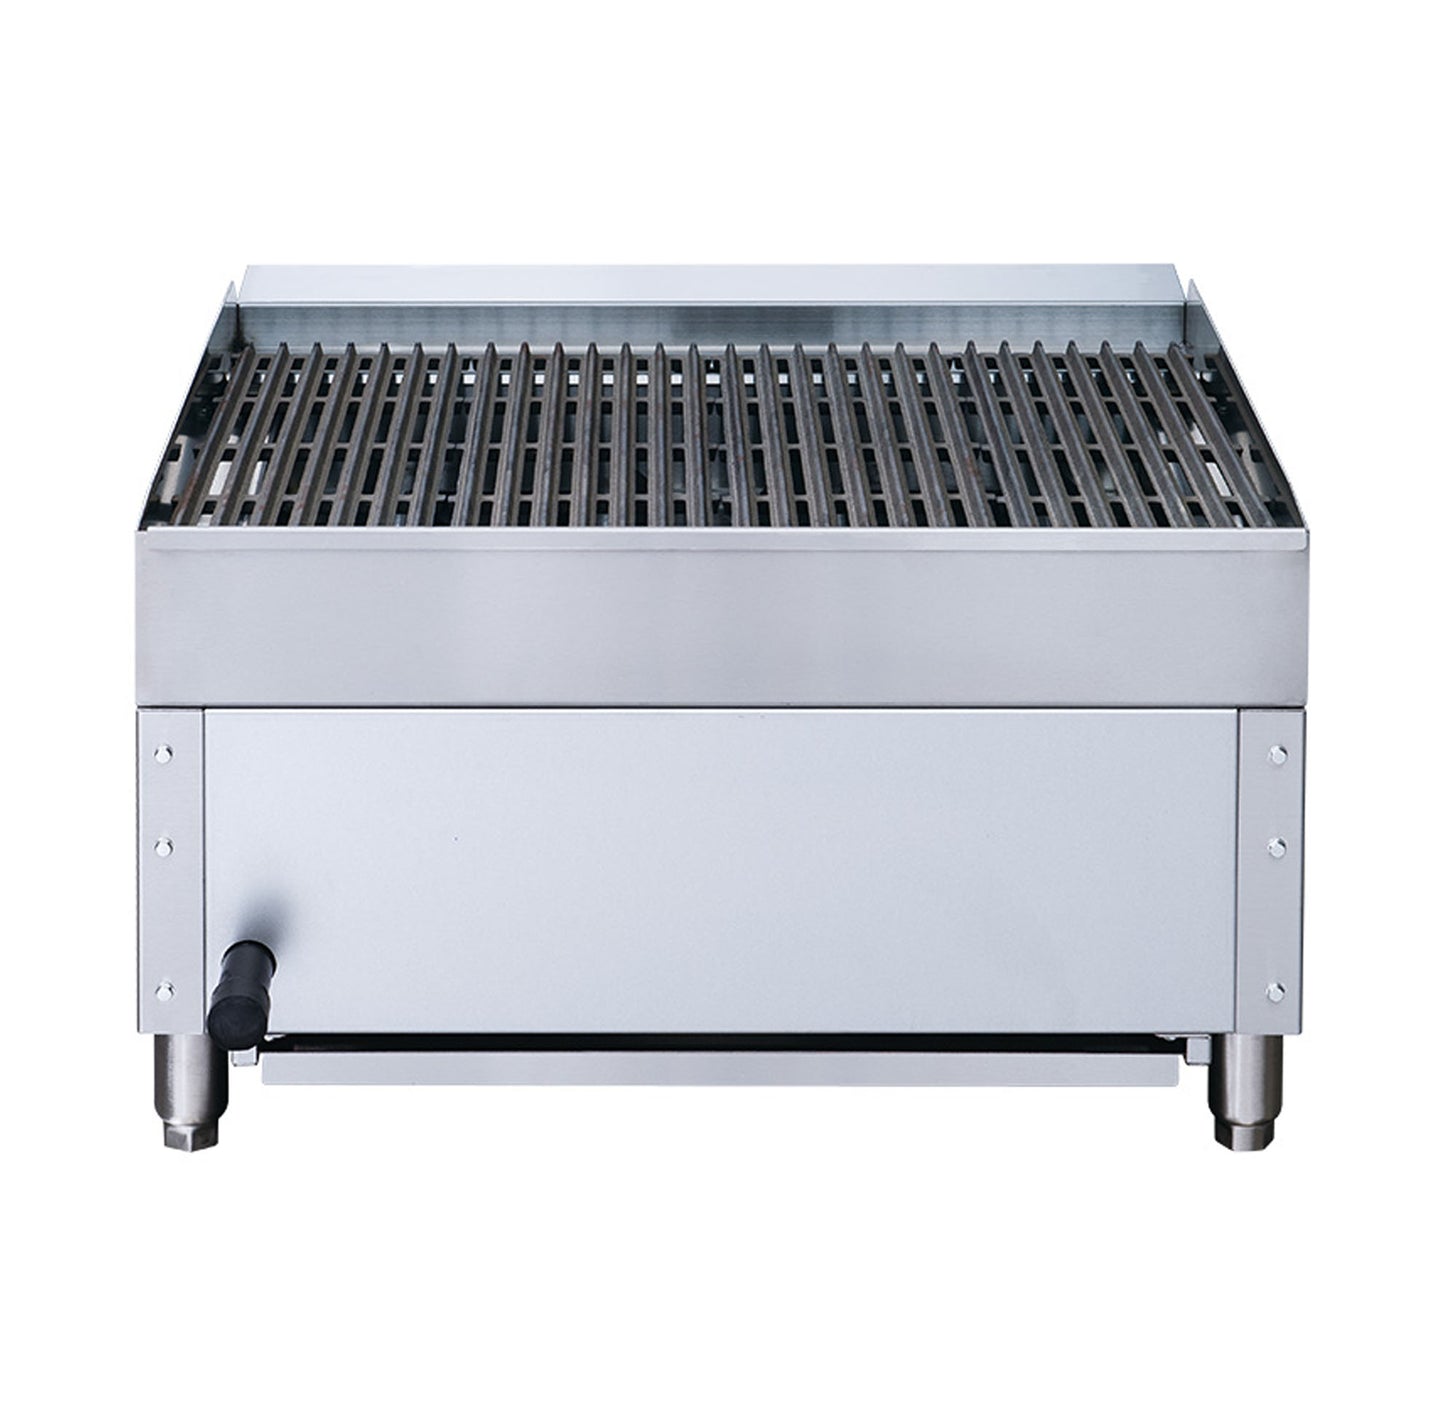 Dukers - DCCB24, Commercial 24" Countertop Charbroiler / Char broiler Natural Gas / Propane